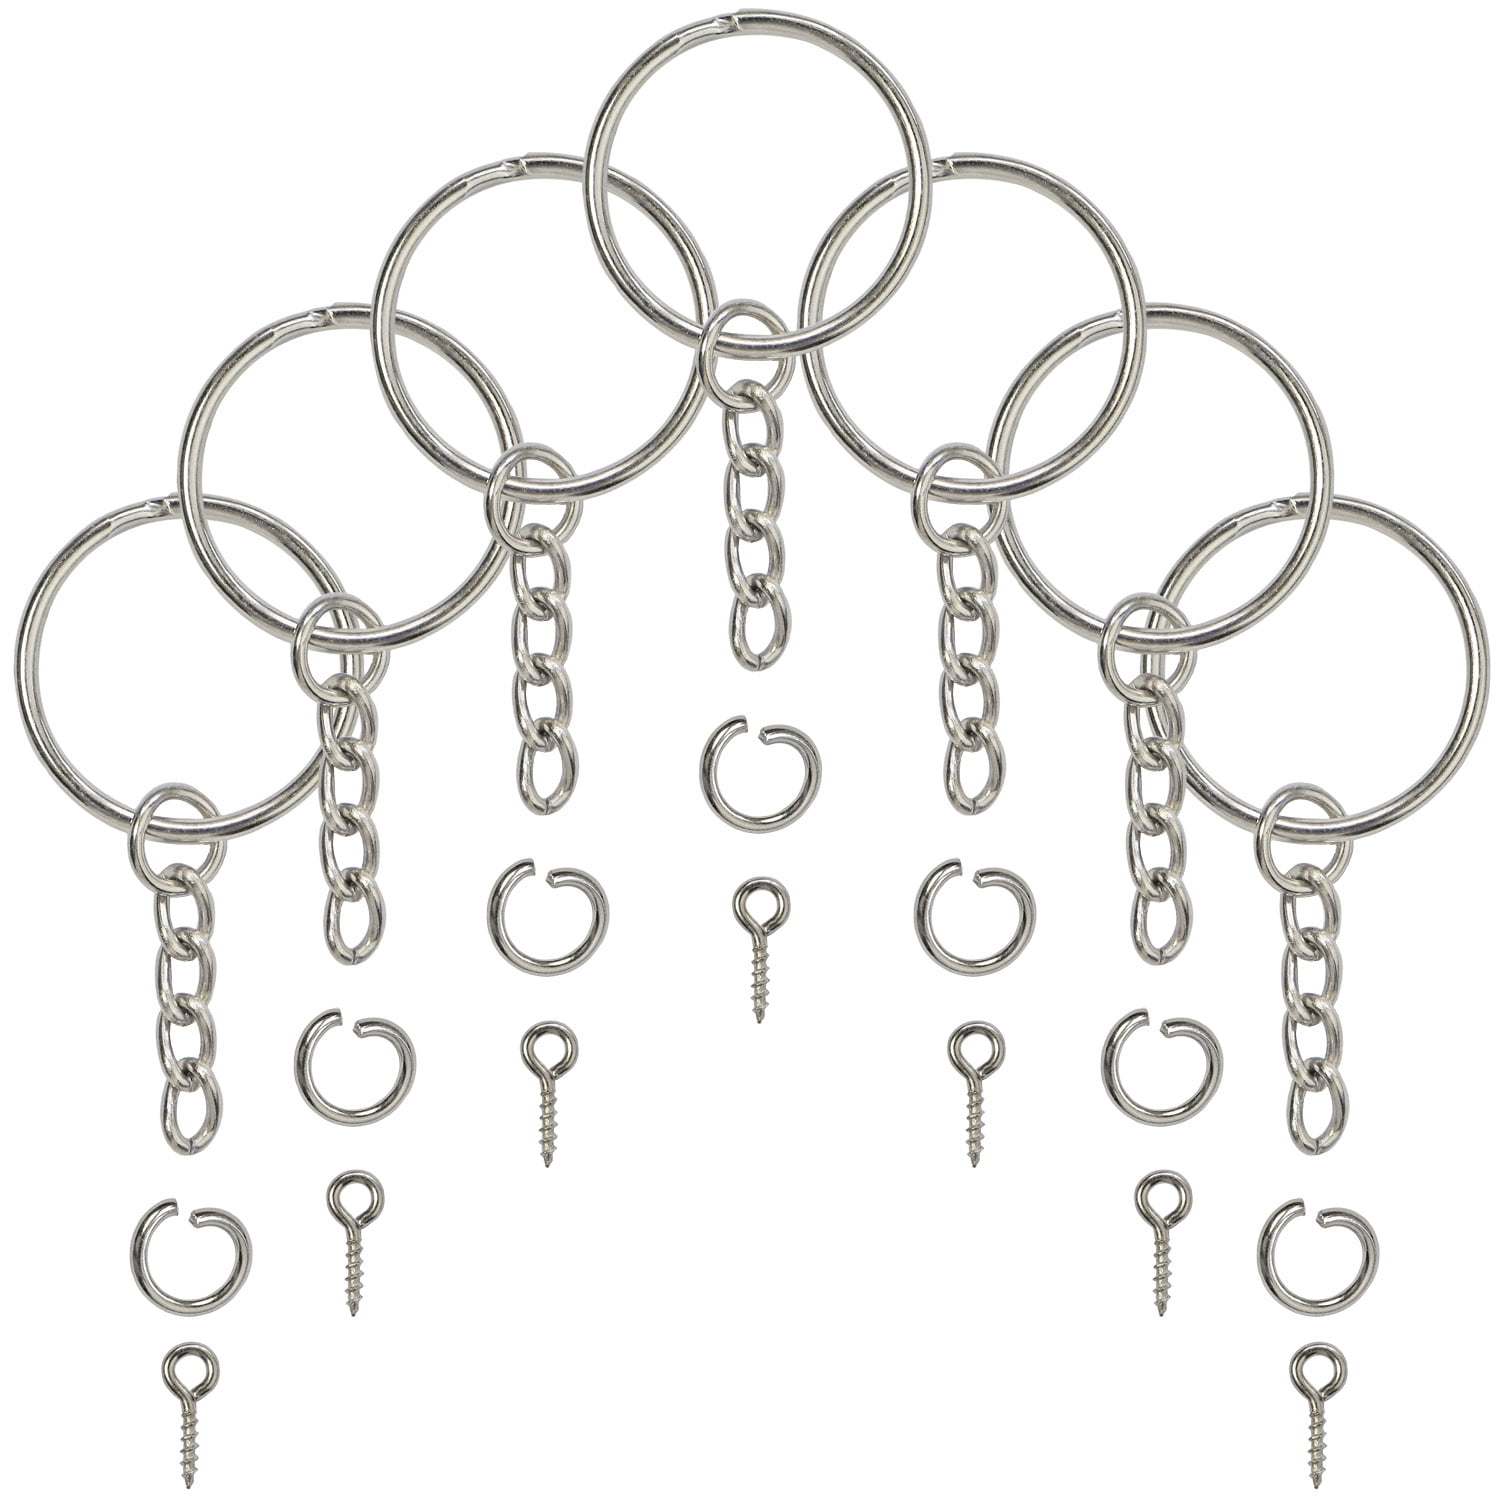 Split Key Ring with Chain, Open Jump Ring and Screw Eye Pins 1 Inch Key  Chain Nickel Plated Silver 120pcs Bulk for Crafts 